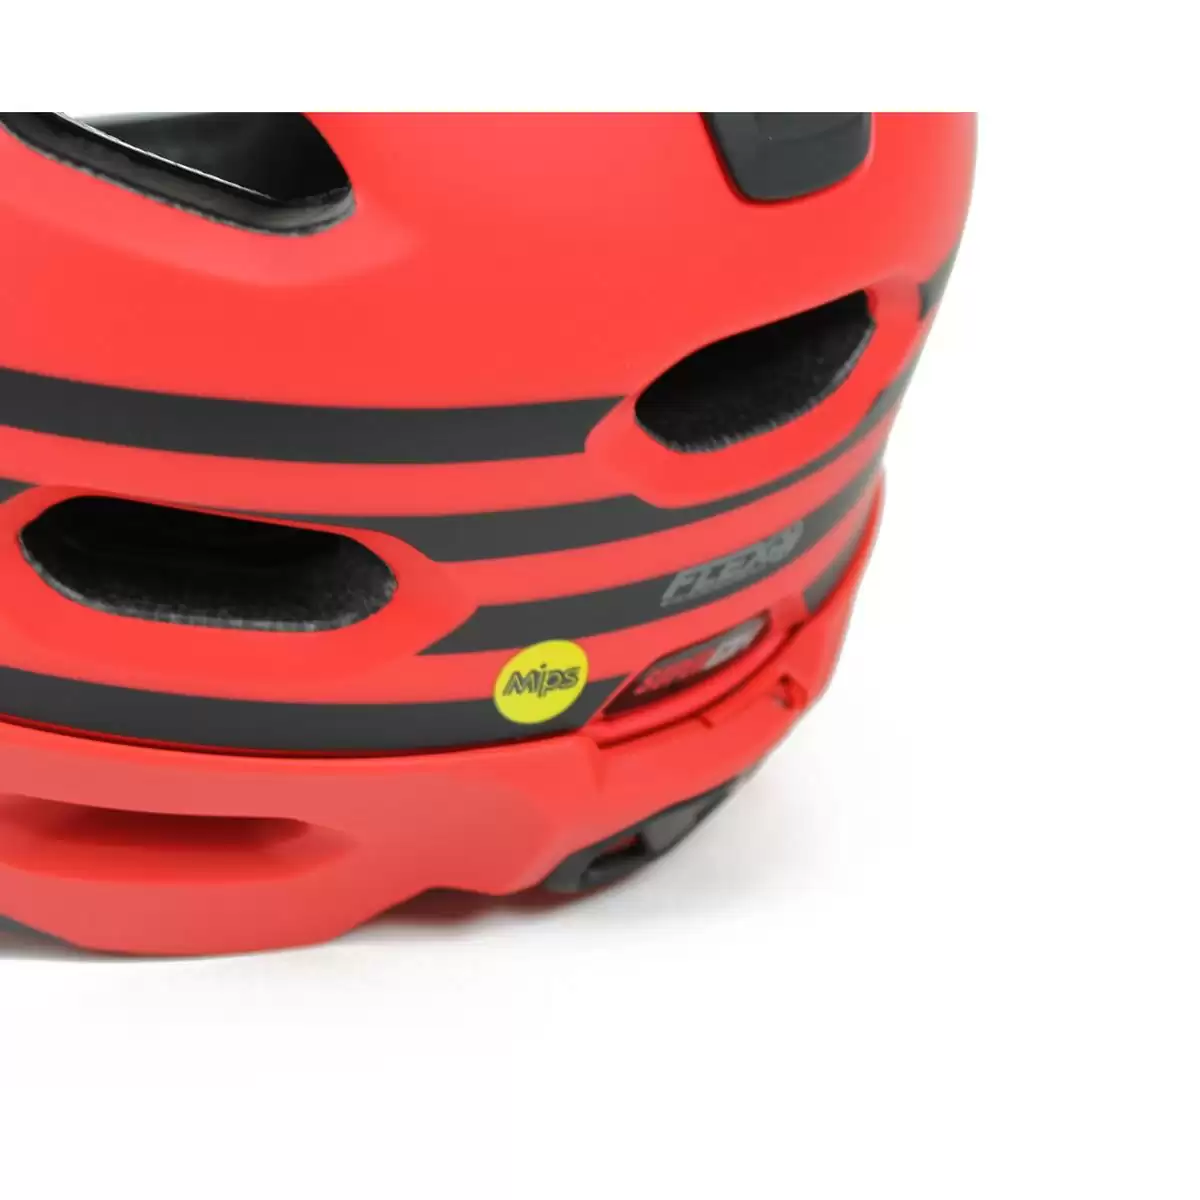 Helmet Super DH MIPS Fasthouse Red Size S (52-56cm) #8